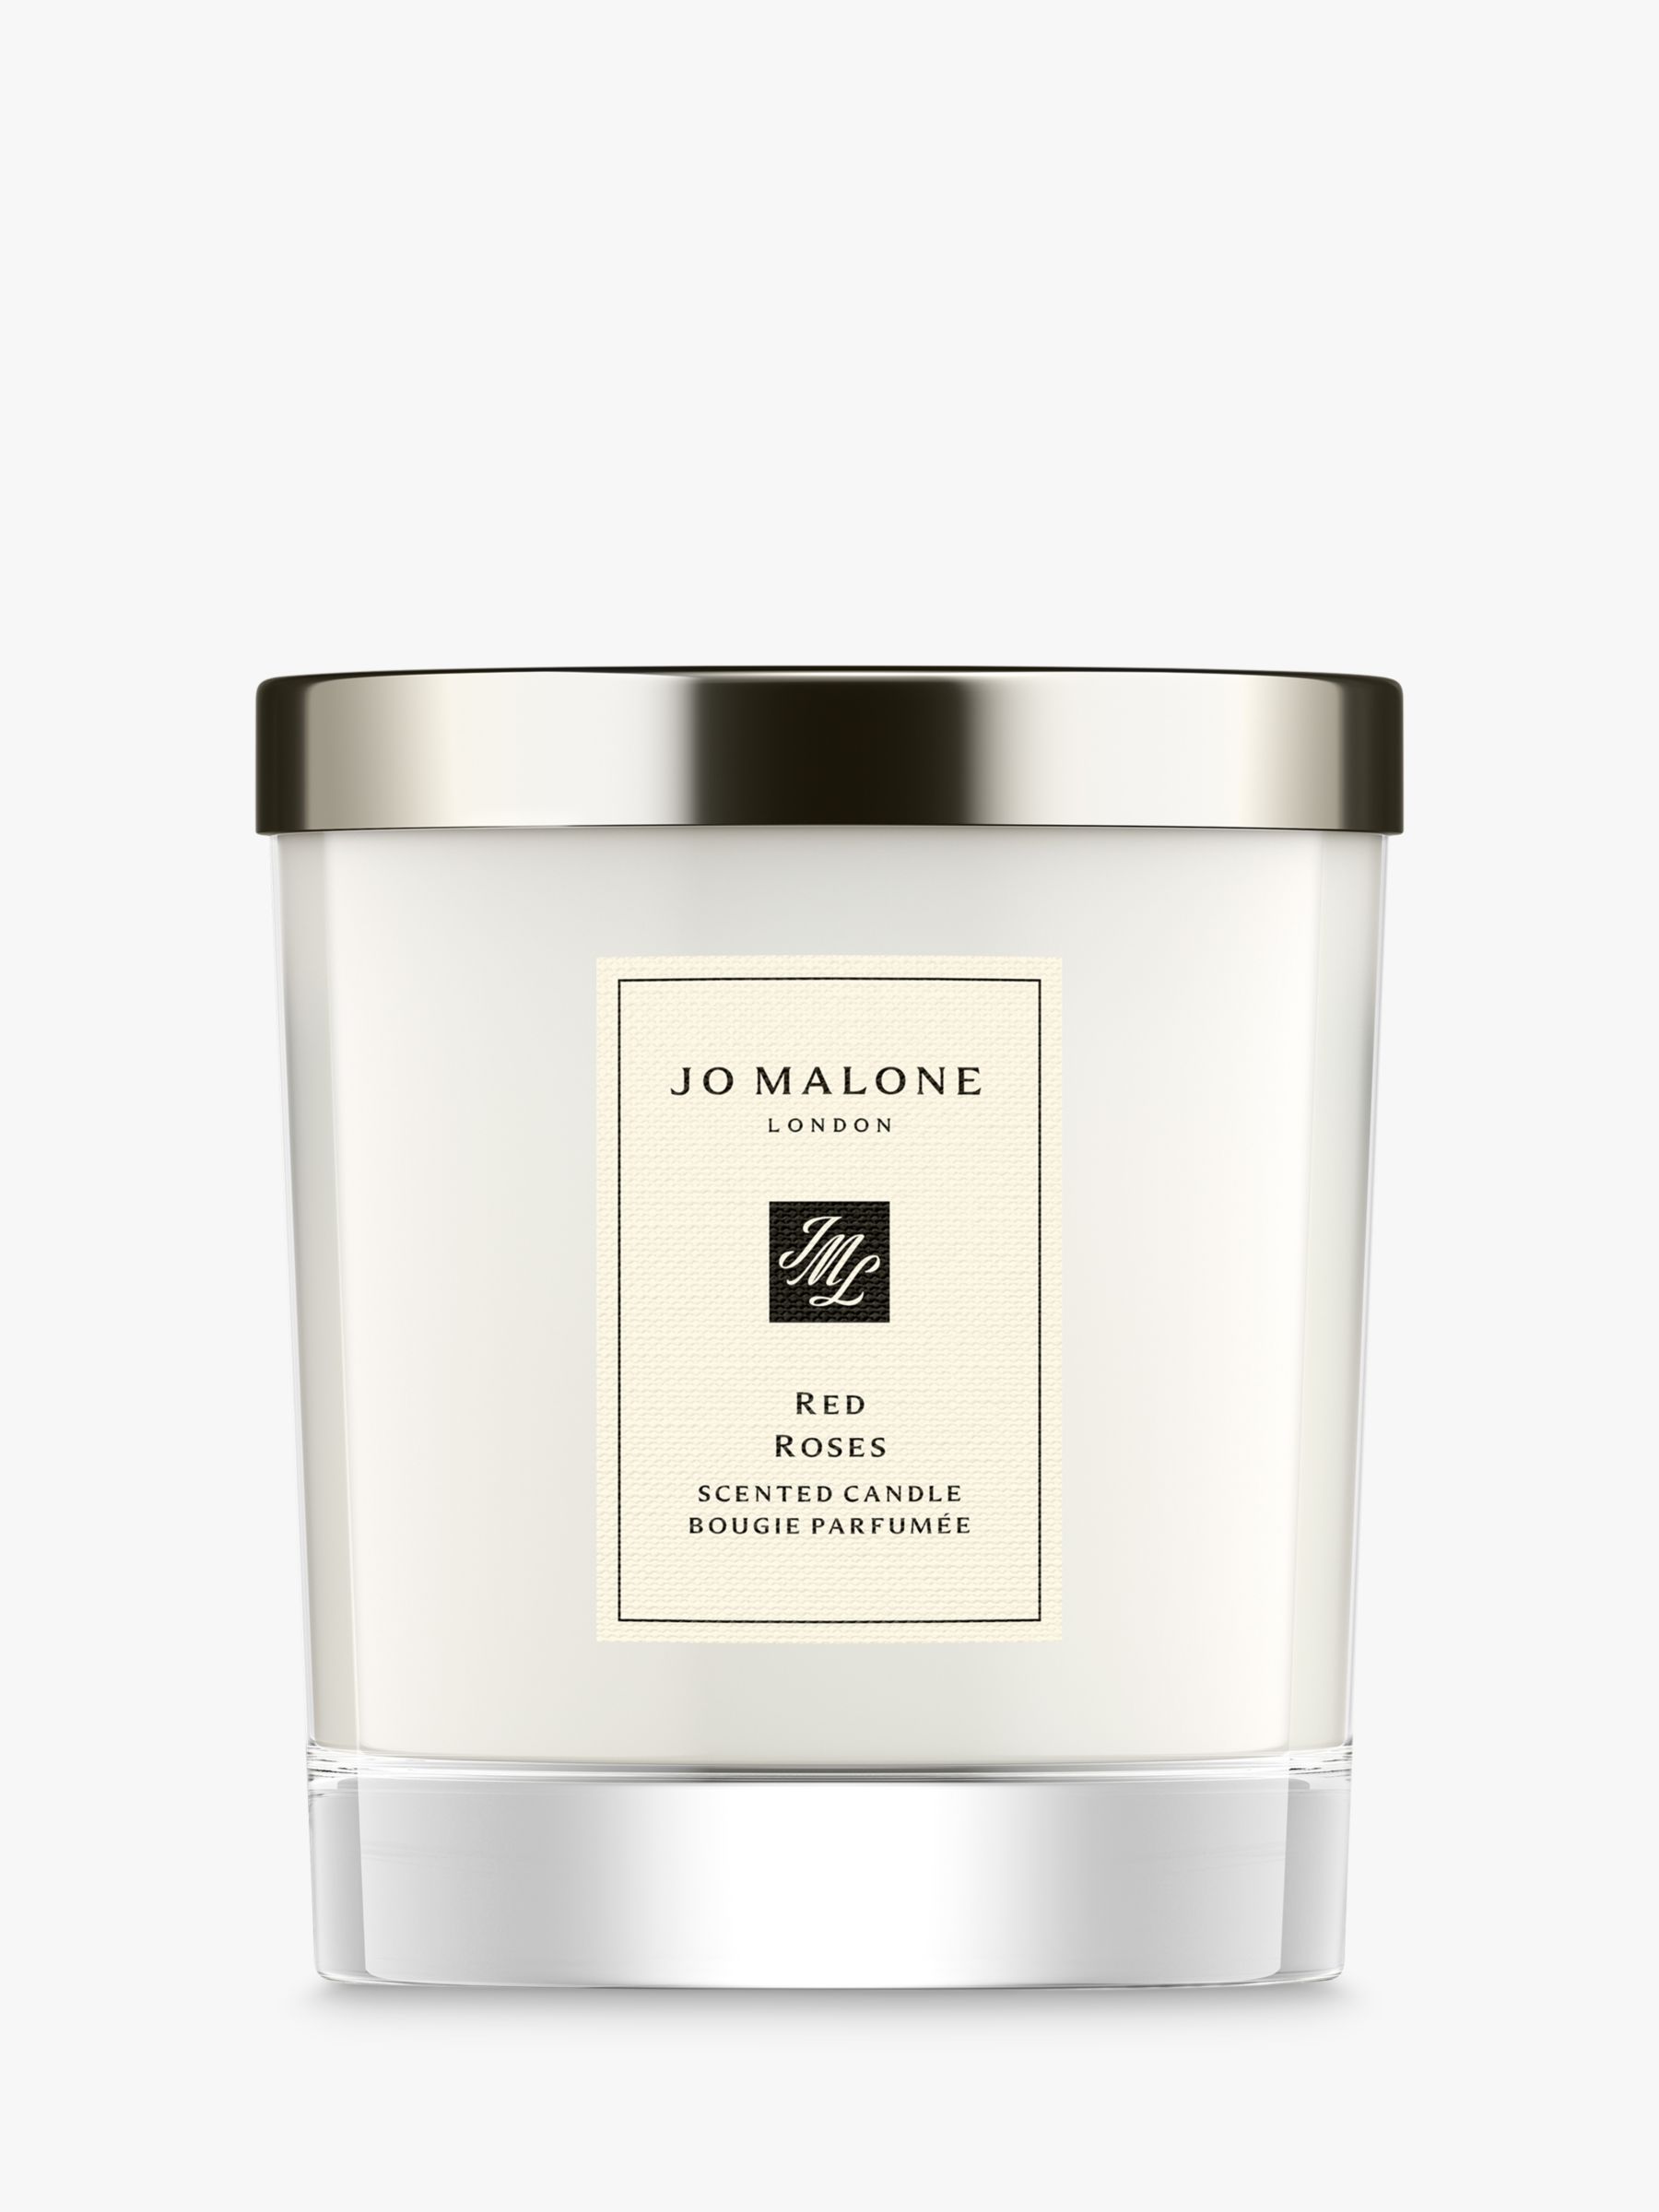 Jo Malone London Red Roses Home Scented Candle, 200g at John Lewis ...